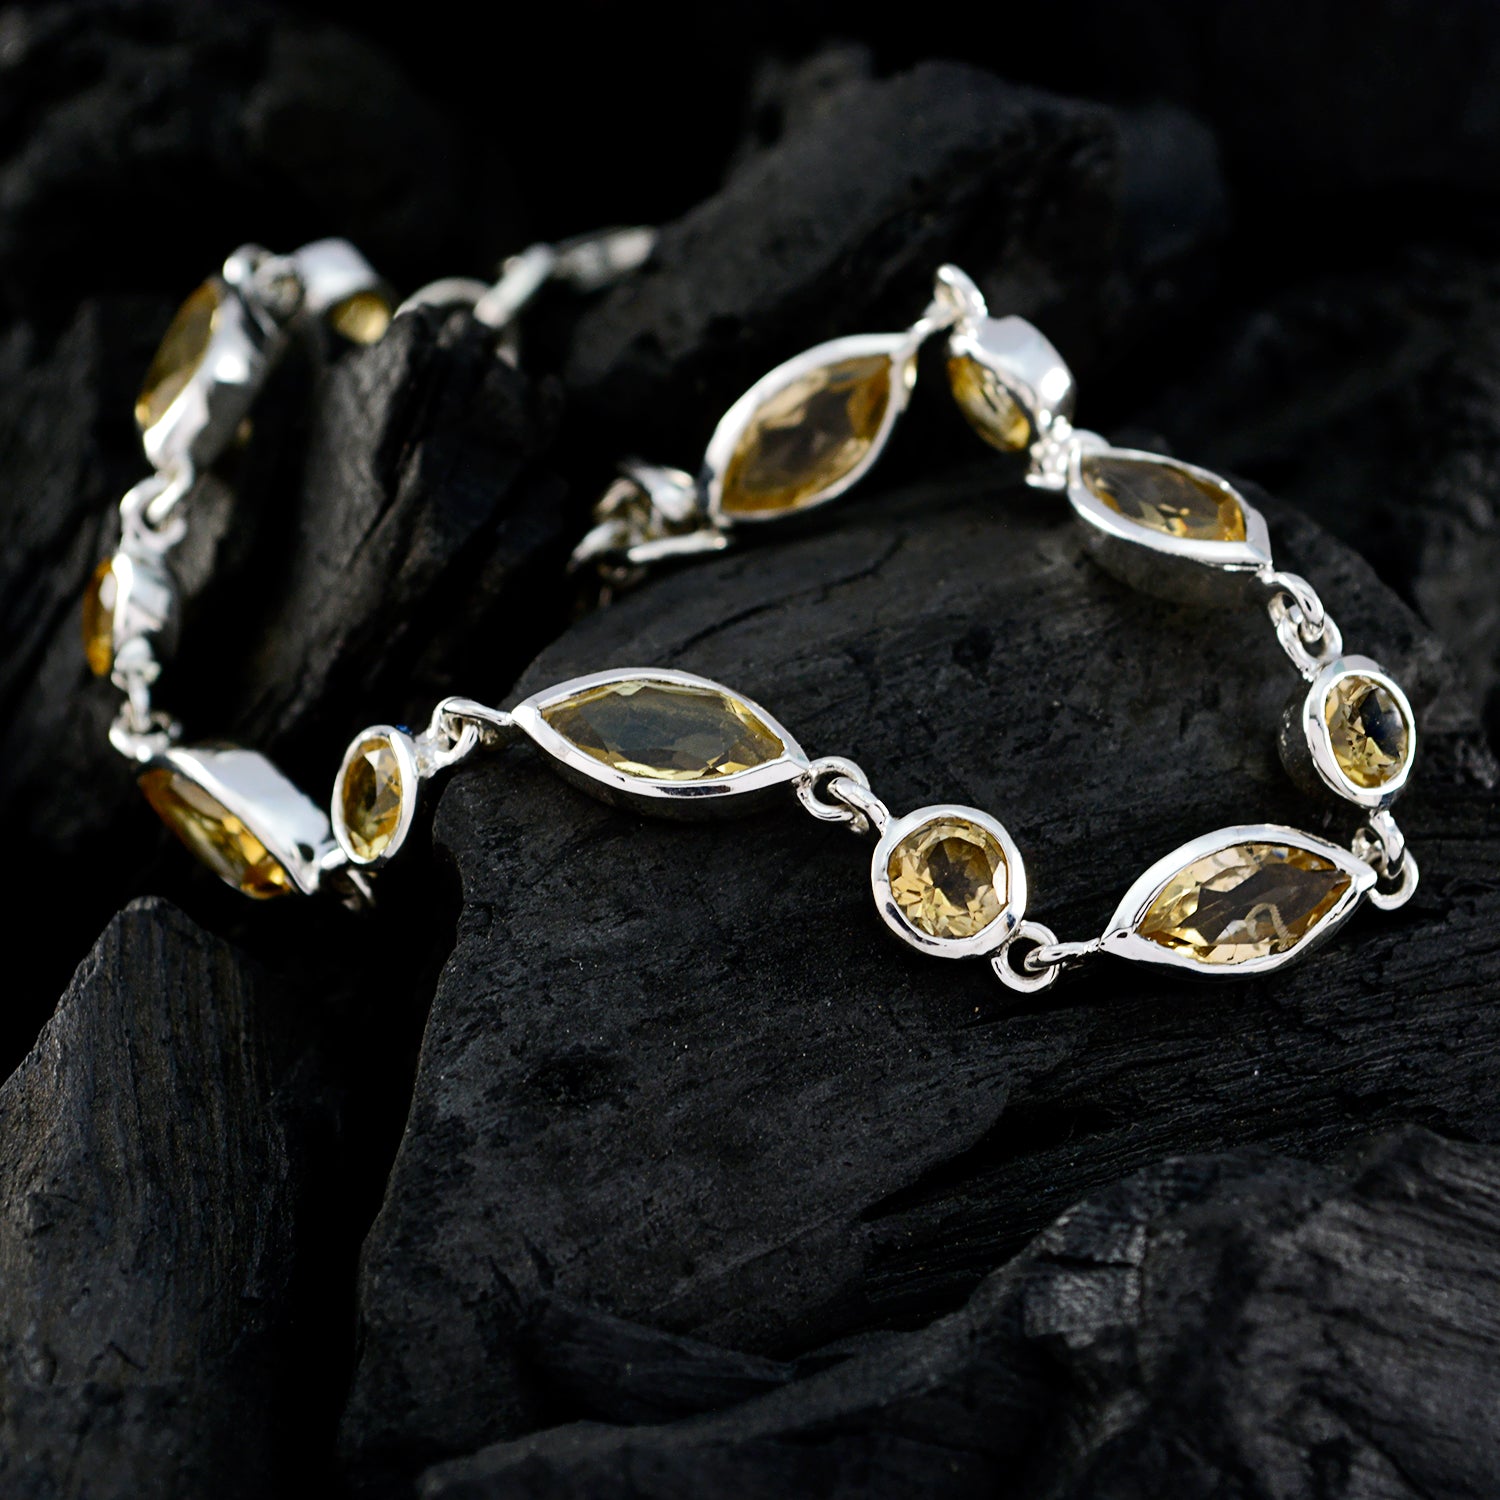 Riyo Good Gemstones Round/Marquise Faceted Yellow Citrine Silver Bracelets easter Sunday gift